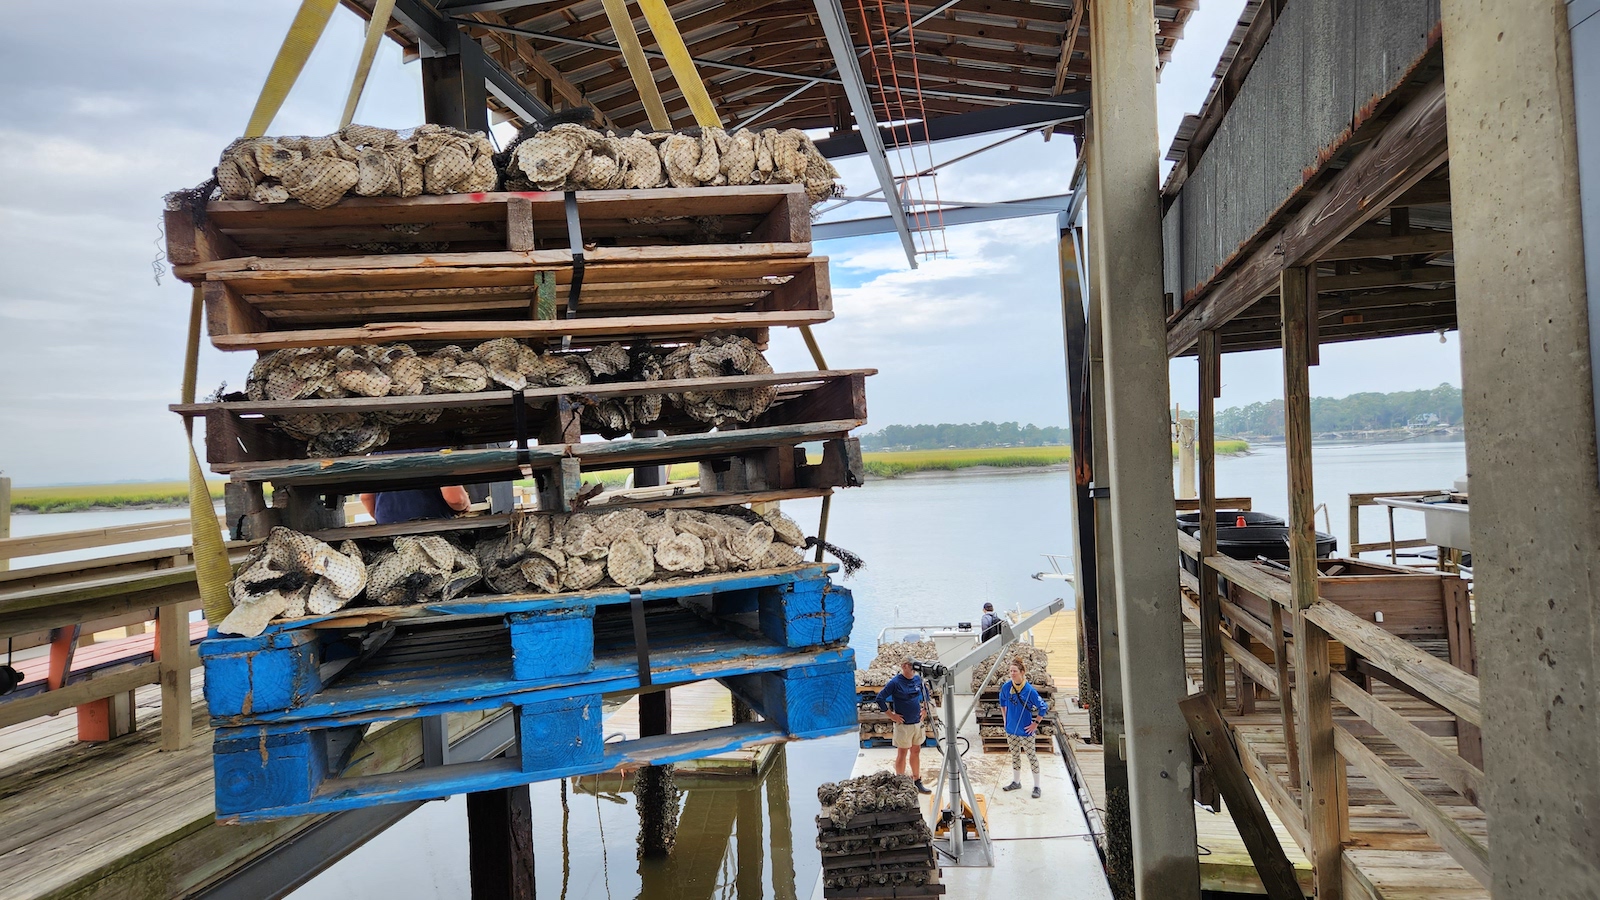 Pallets loaded with oyster shells are held by a winch over a river.